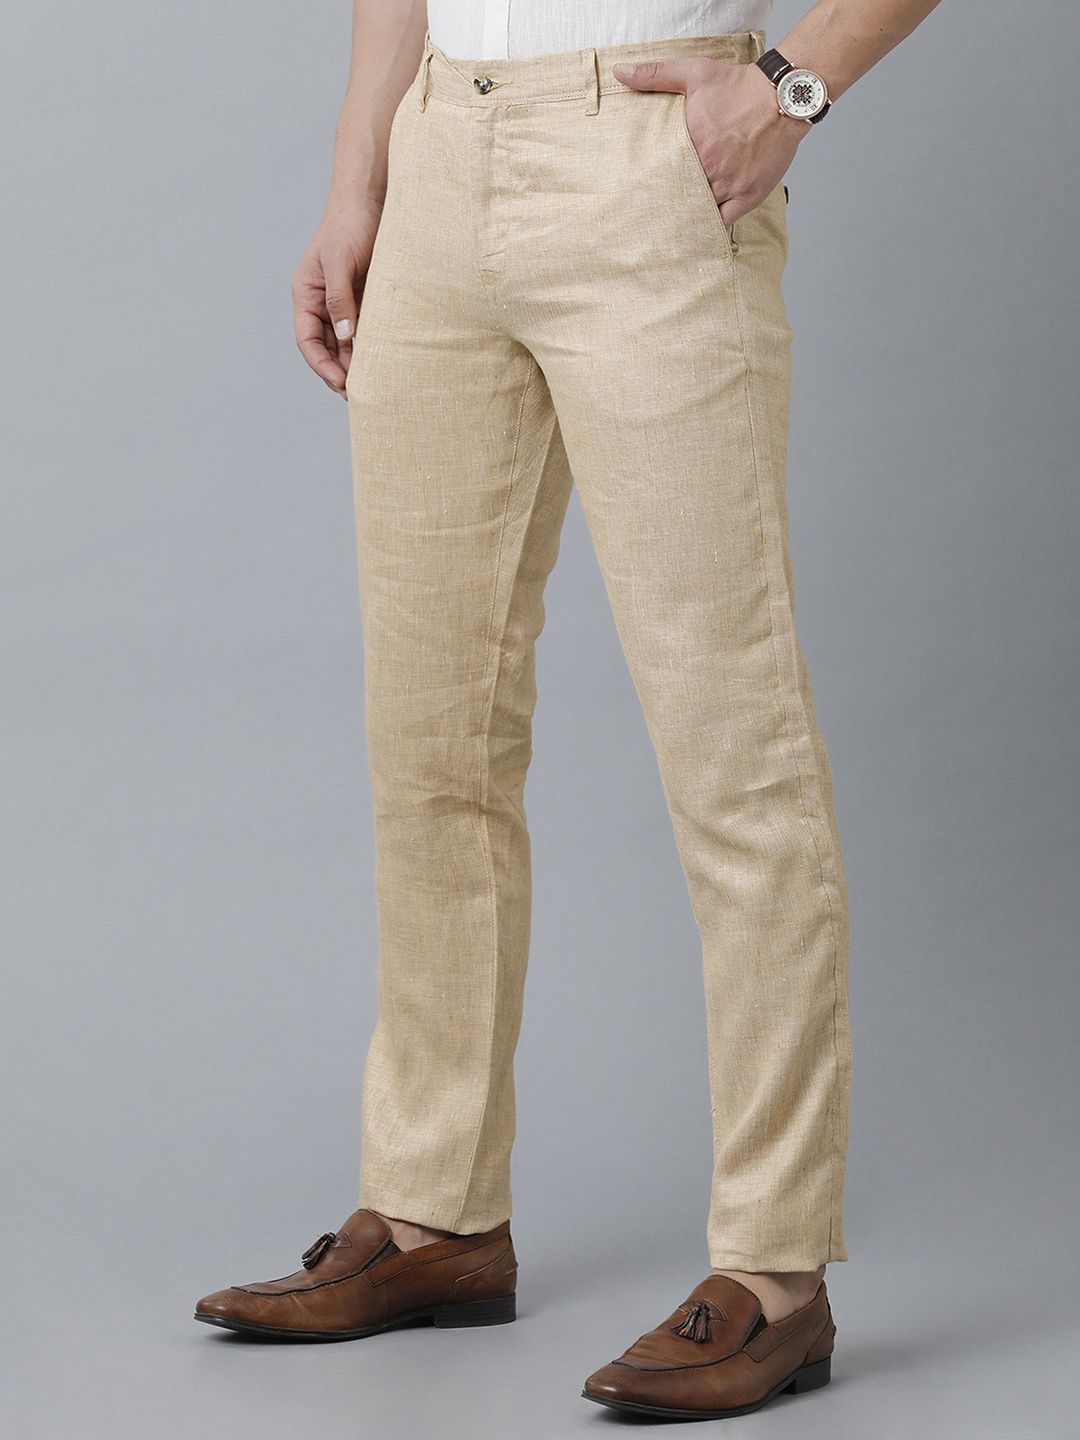 Must-Have Trousers for Men to Look Smart – JDC Store Online Shopping